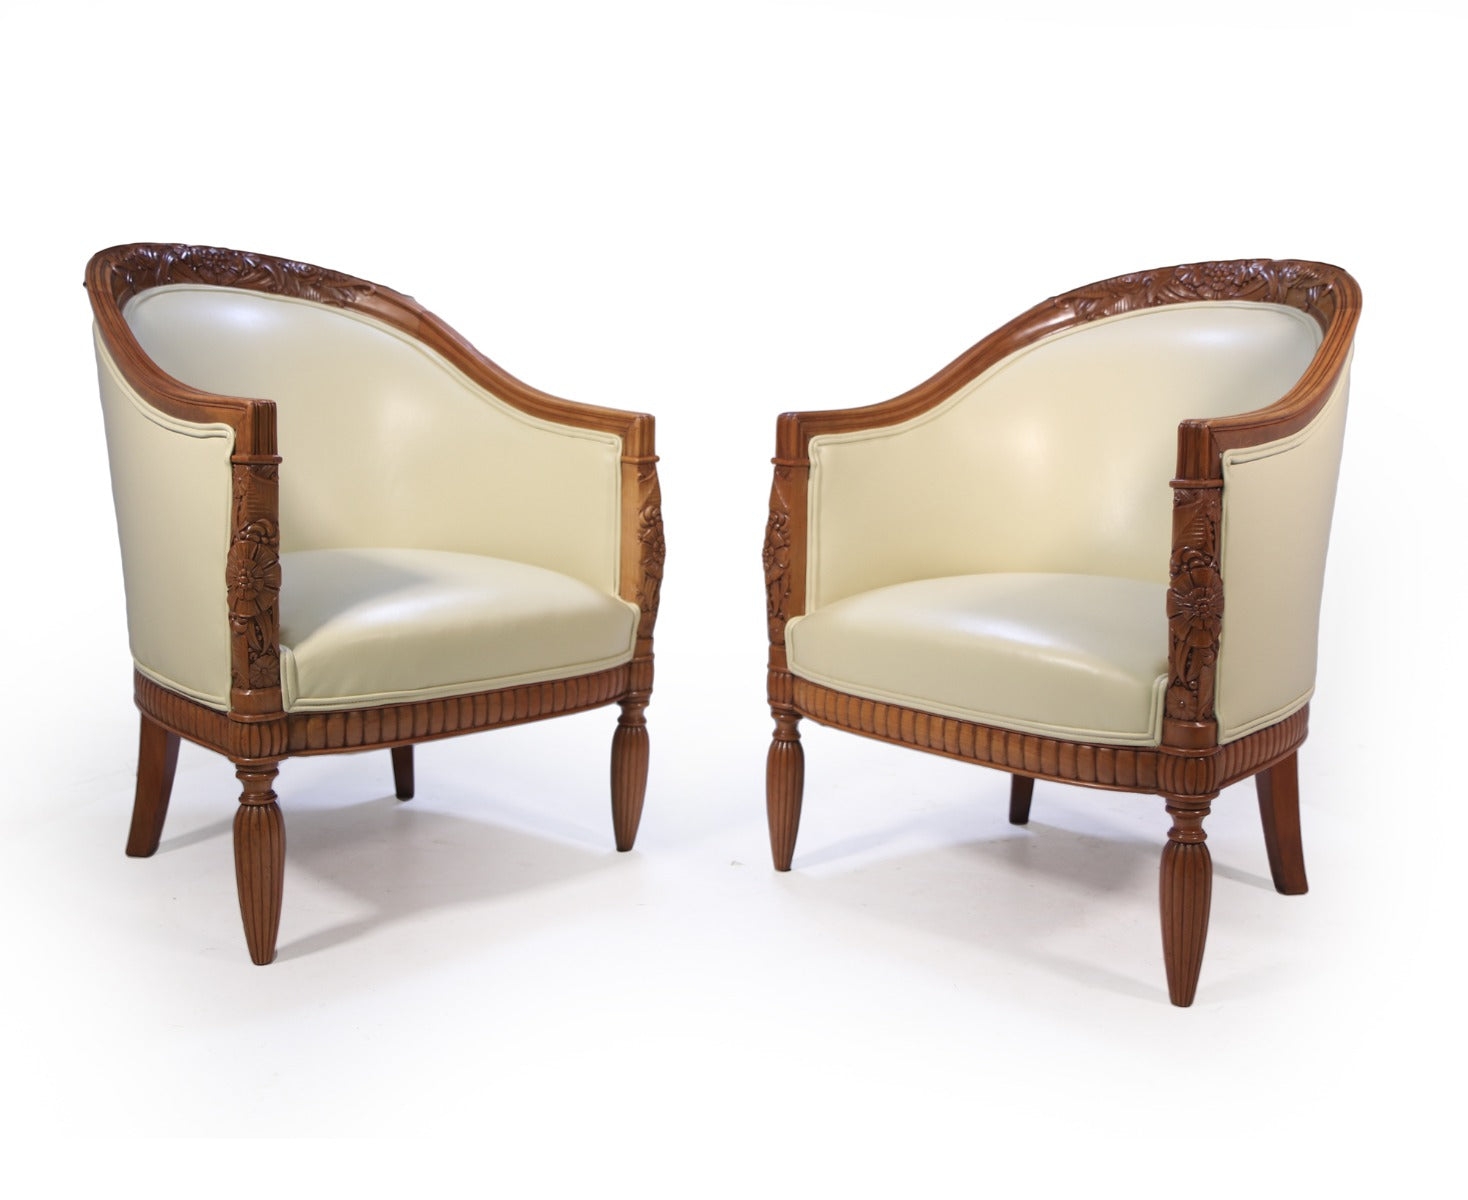 Pair of Carved Pear French Art Deco Armchairs – The Furniture Rooms